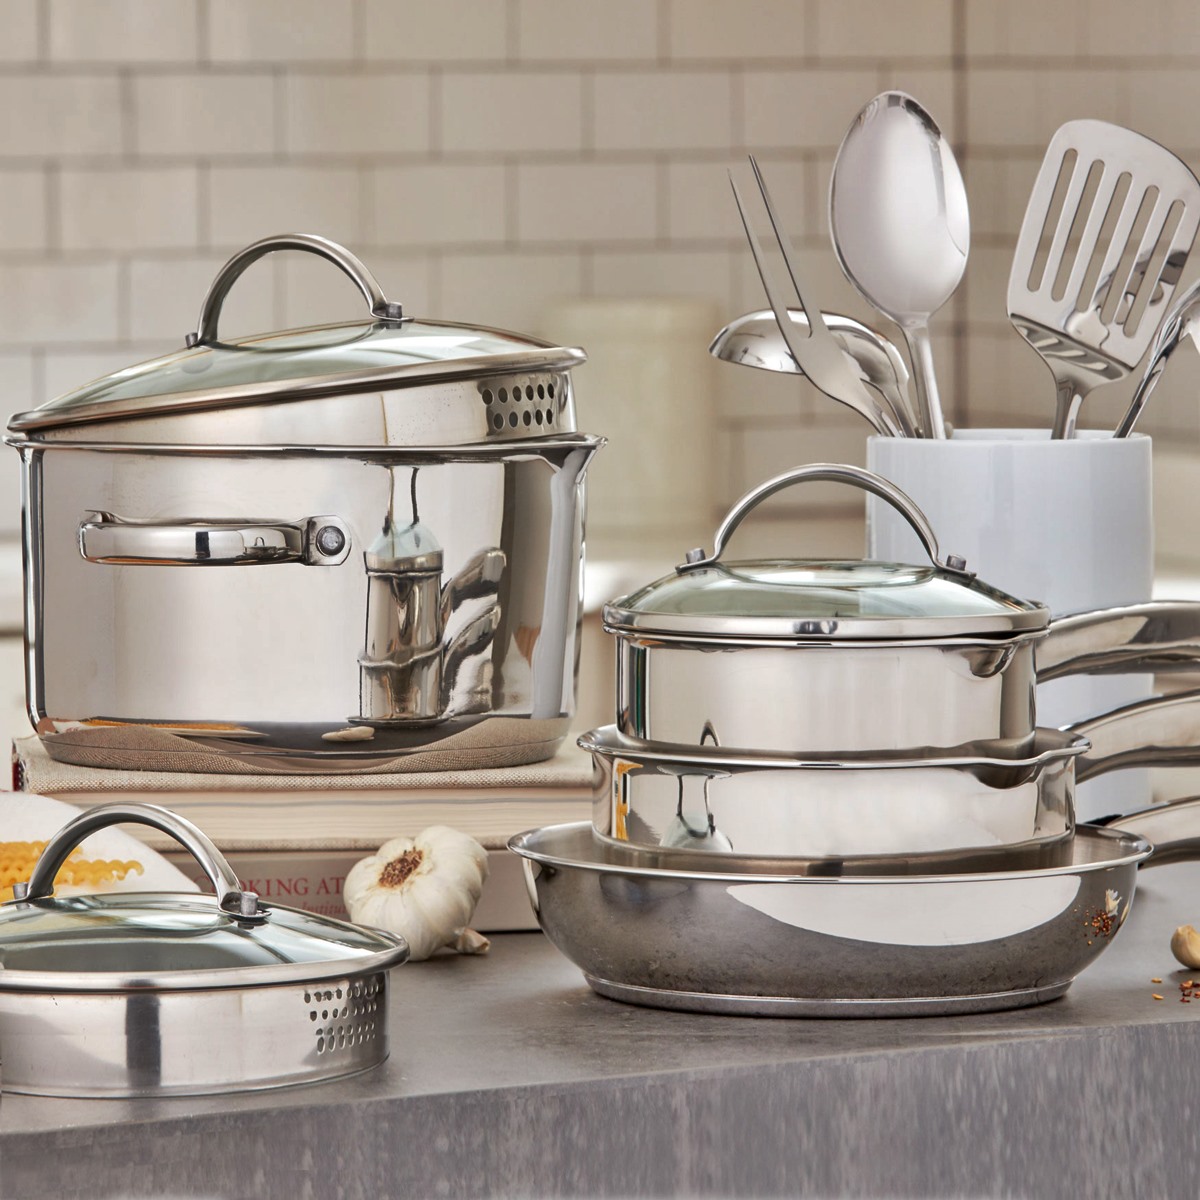 What Cookware Is Safe For Metal Utensils? Choosing Durability And Resistance In The Kitchen!